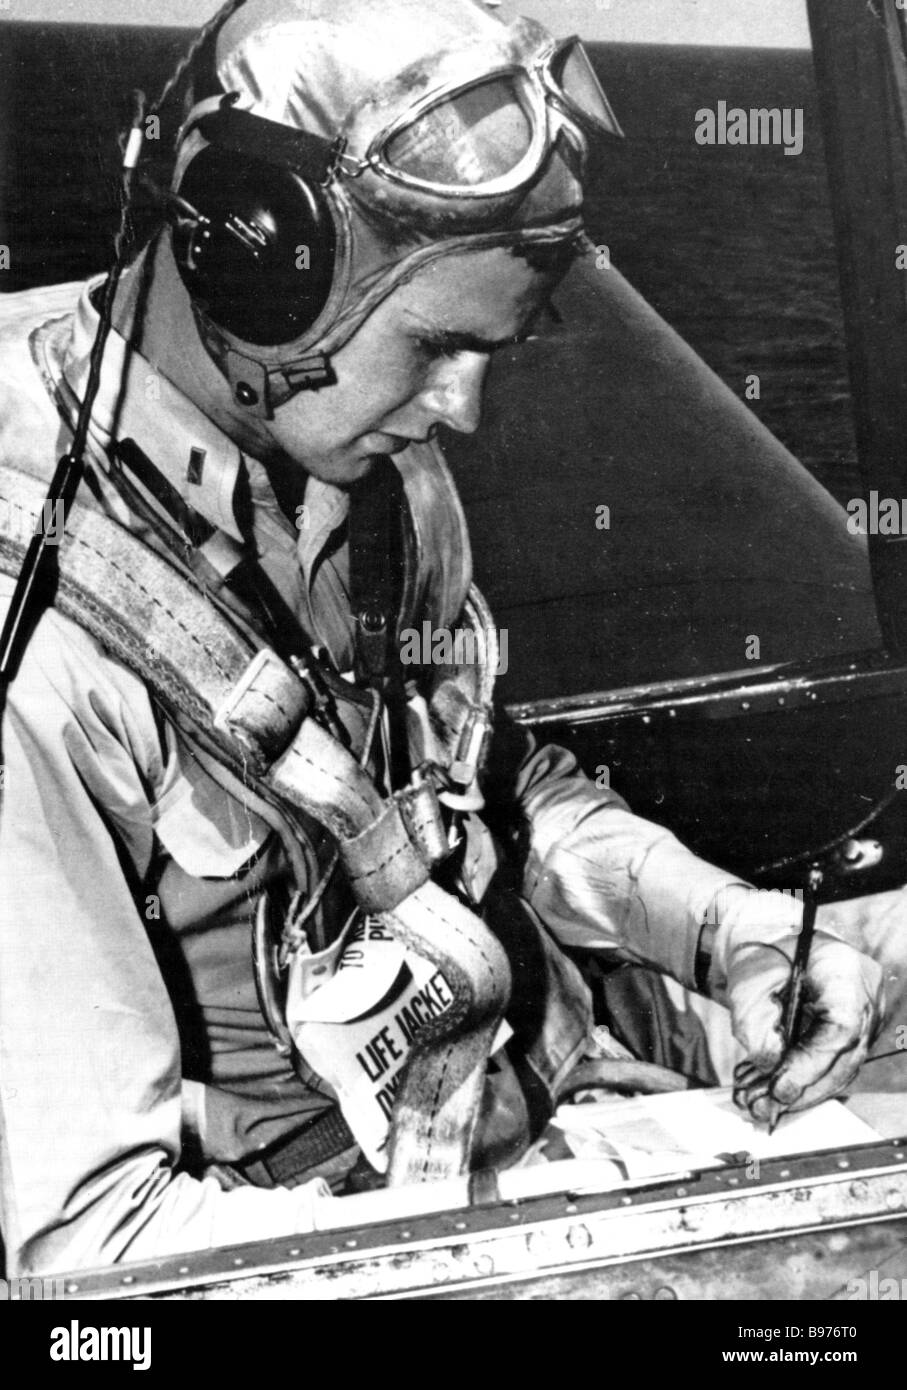 GEORGE H.W. BUSH Former American President in the cockpit of a Grumman TBM Avenger on the aircraft carrier USS San Jacinto about 1944. Stock Photo